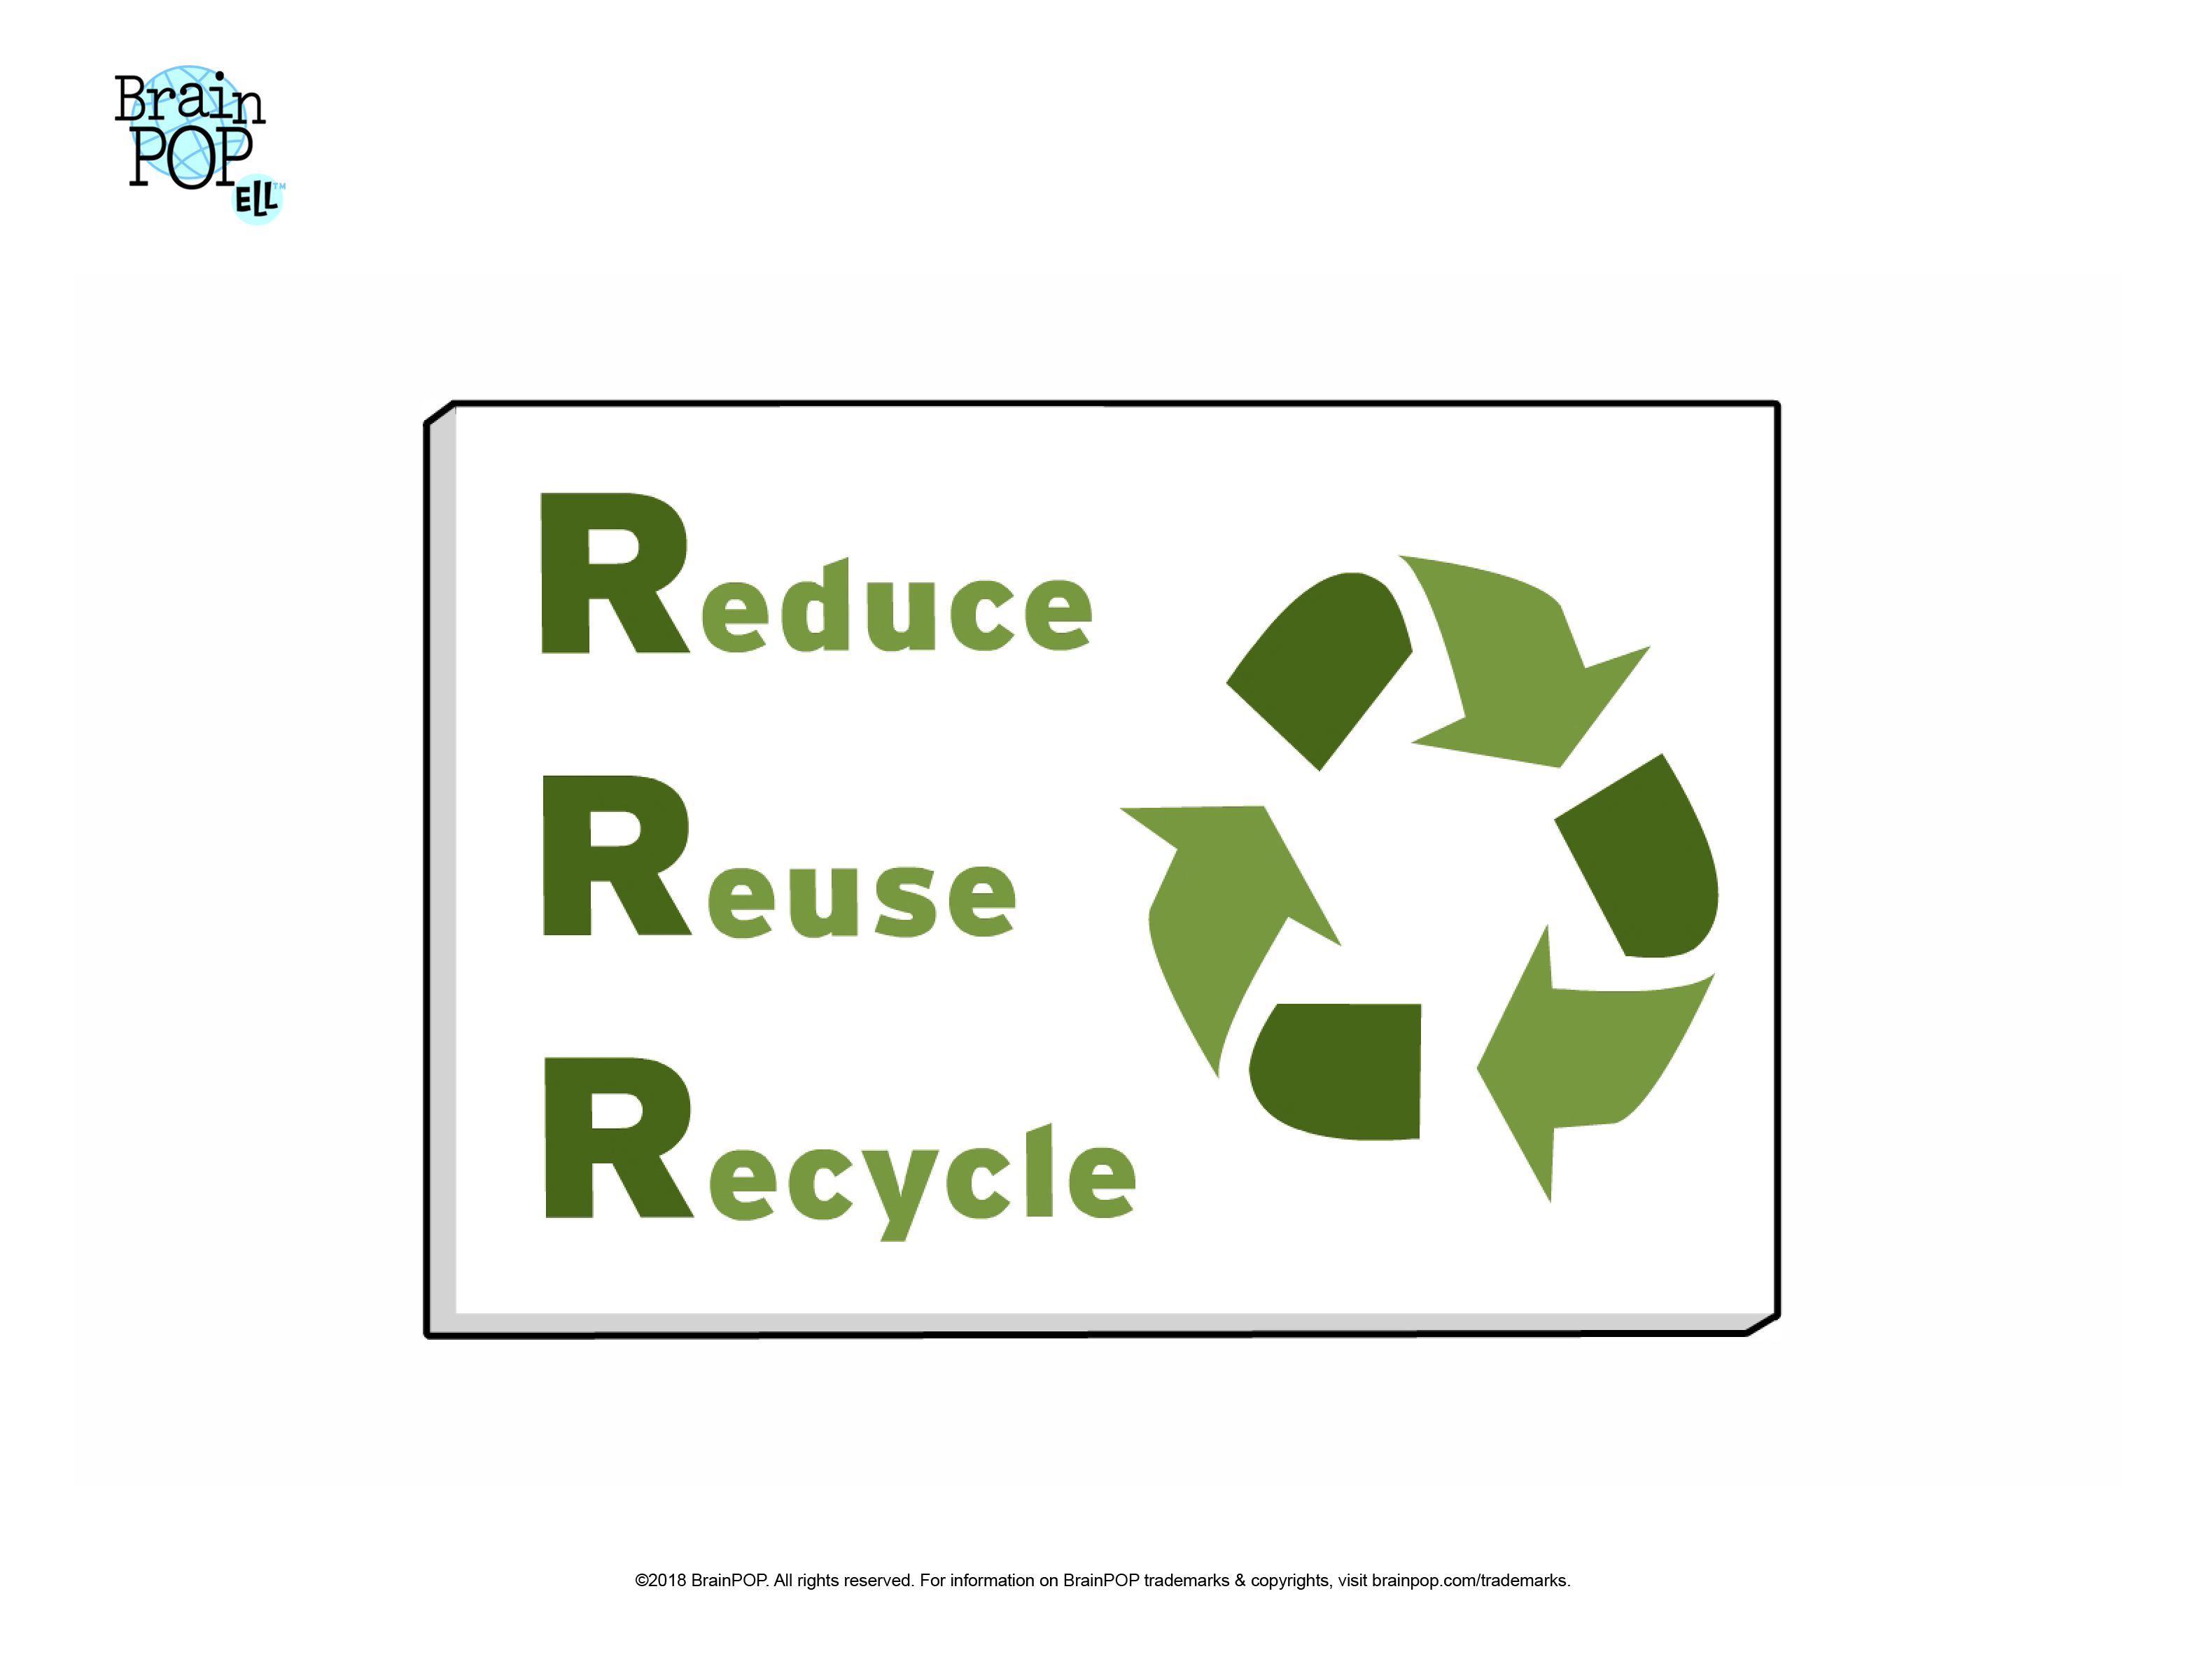 Reduce, Reuse, Recycle Image